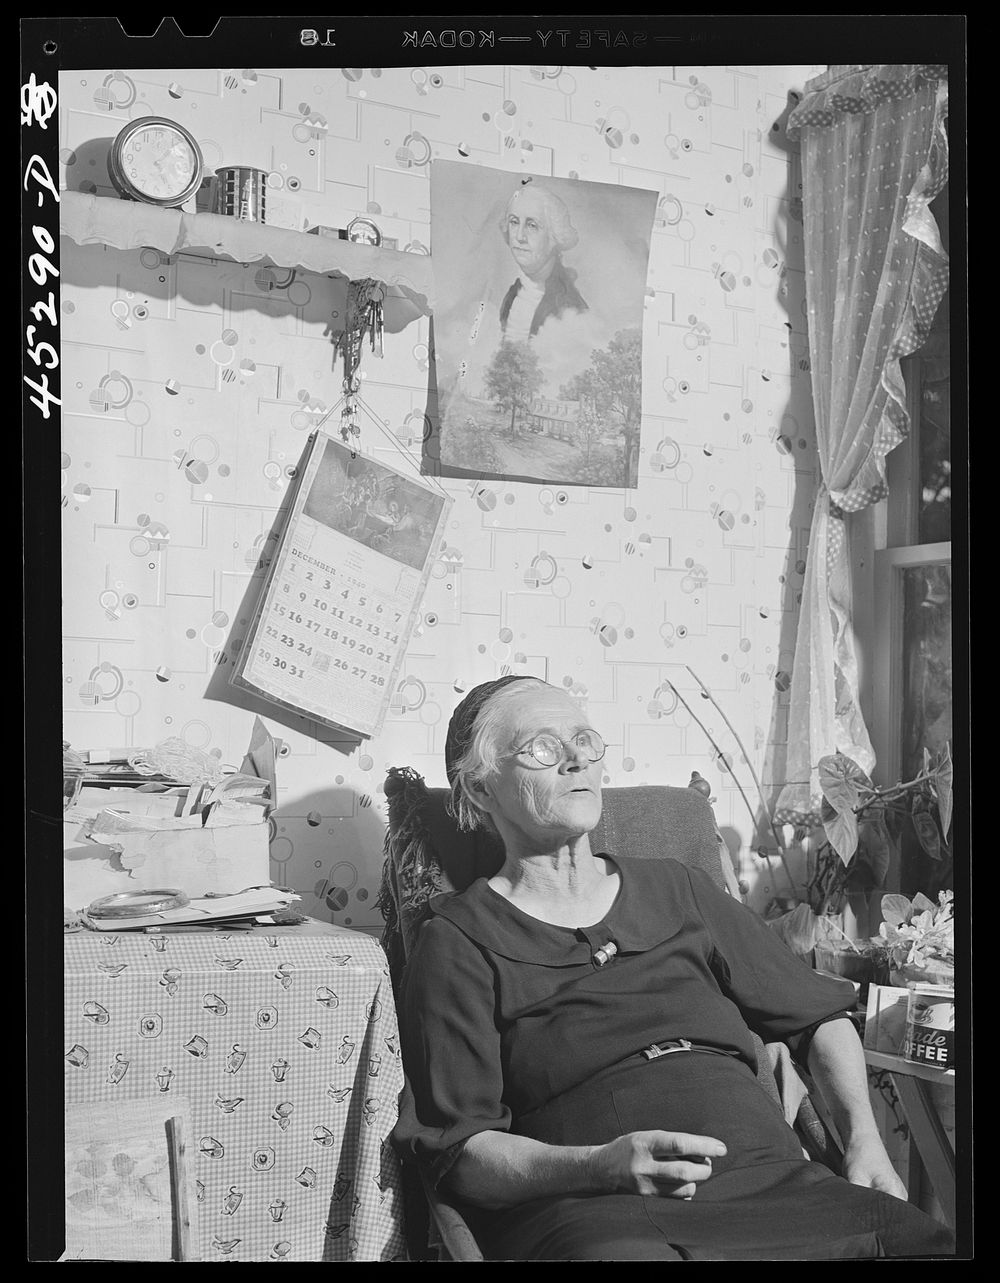 Mrs. Myrtle Higgins of Leraysville, New York, with some of the belongings she has packed preparing to move out of the area…